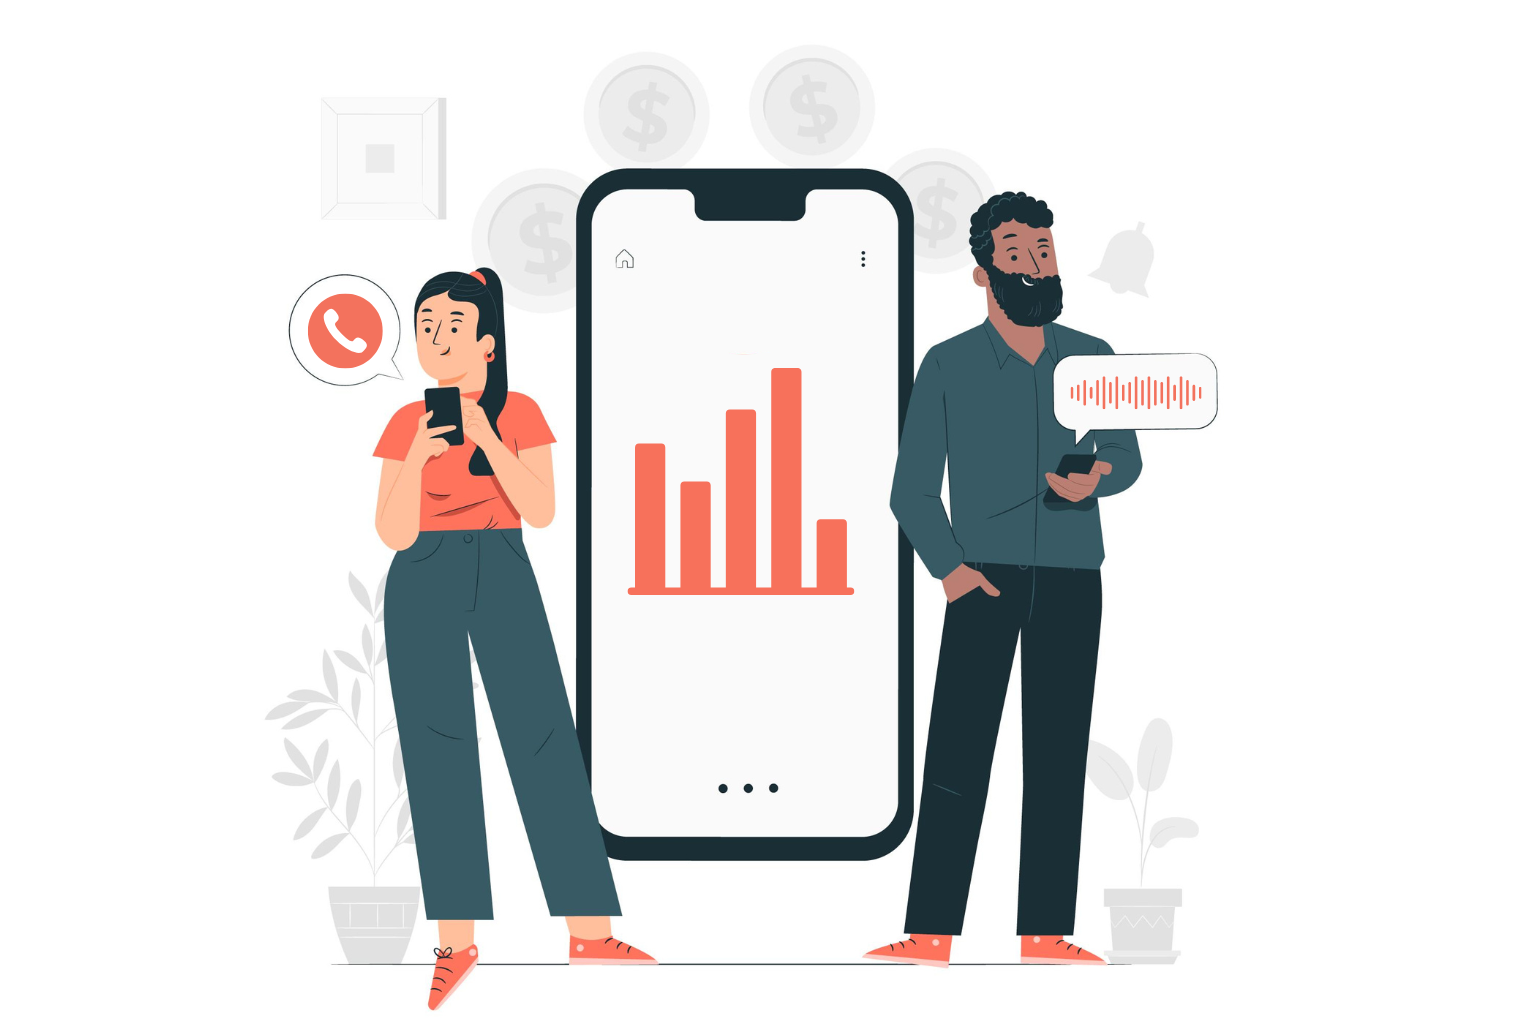 A man and a woman with a smartphone standing next to a large cellphone in which a bar chart displays illustration vector graphic